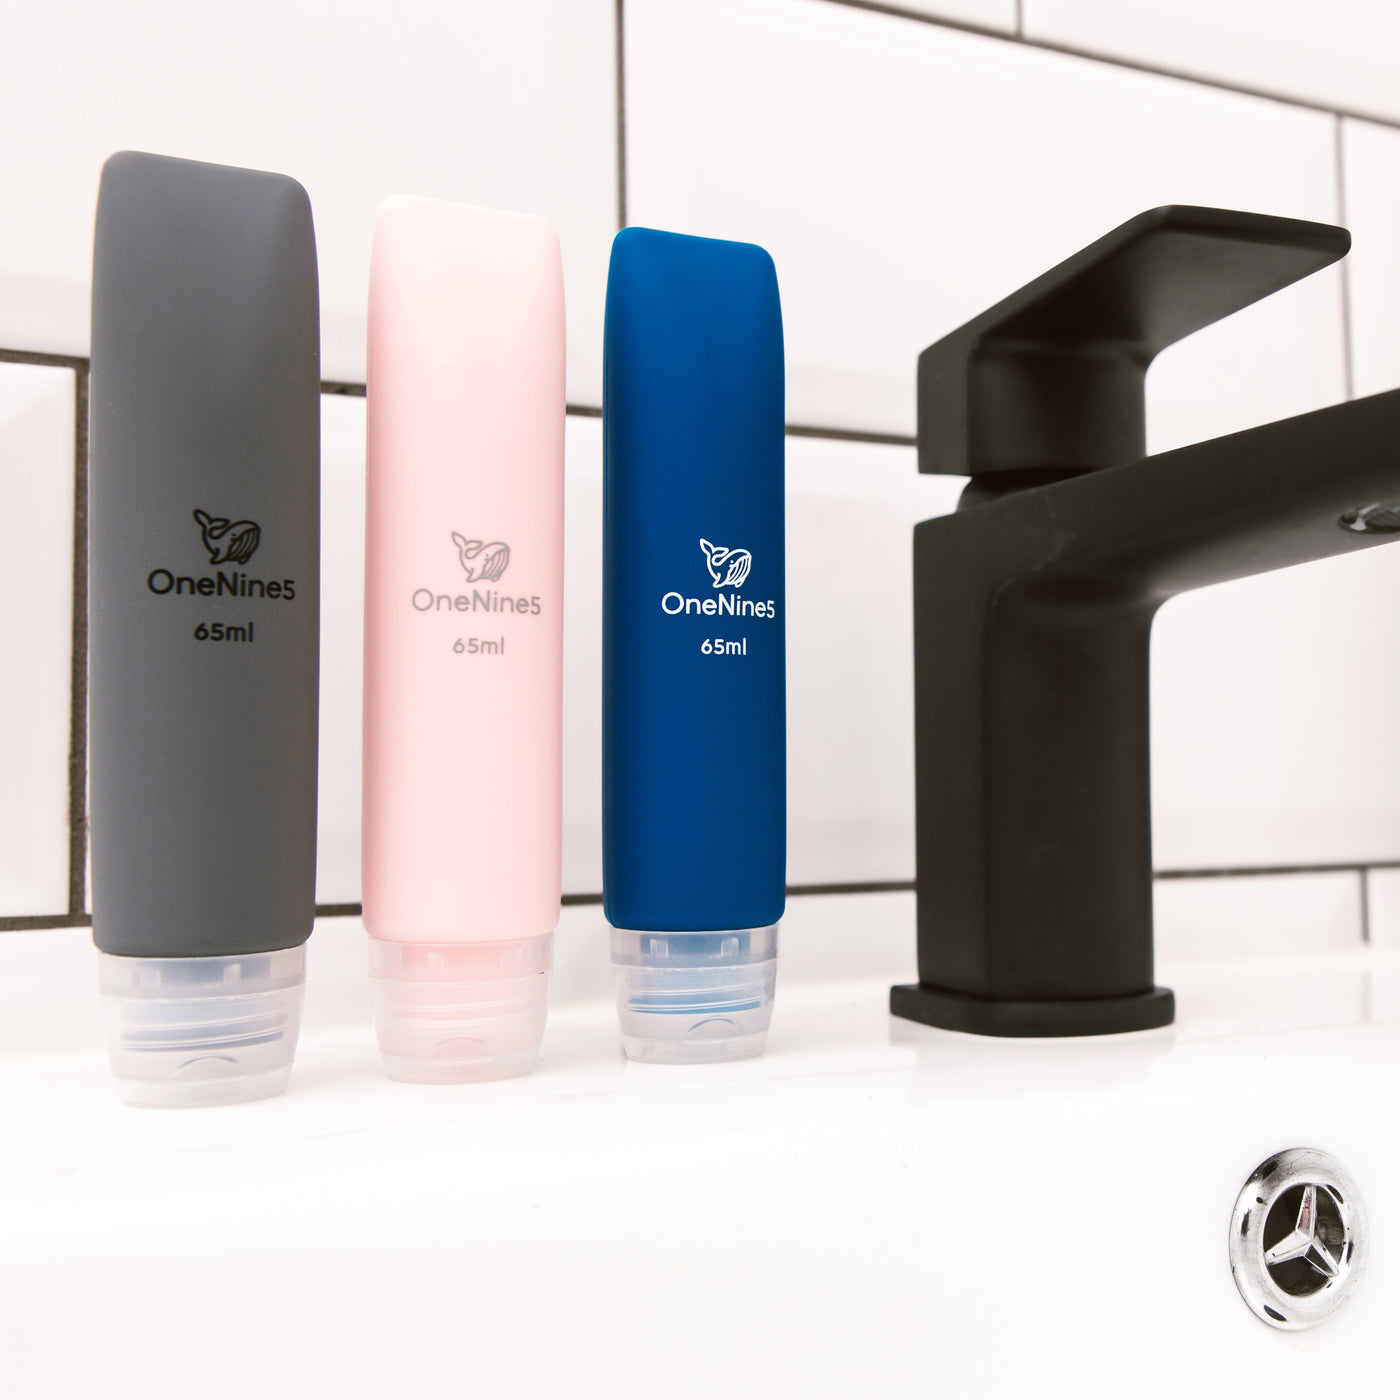 3 pack of OneNine5 mixed colour travel bottles on the bathroom sink, to the right of a black tap